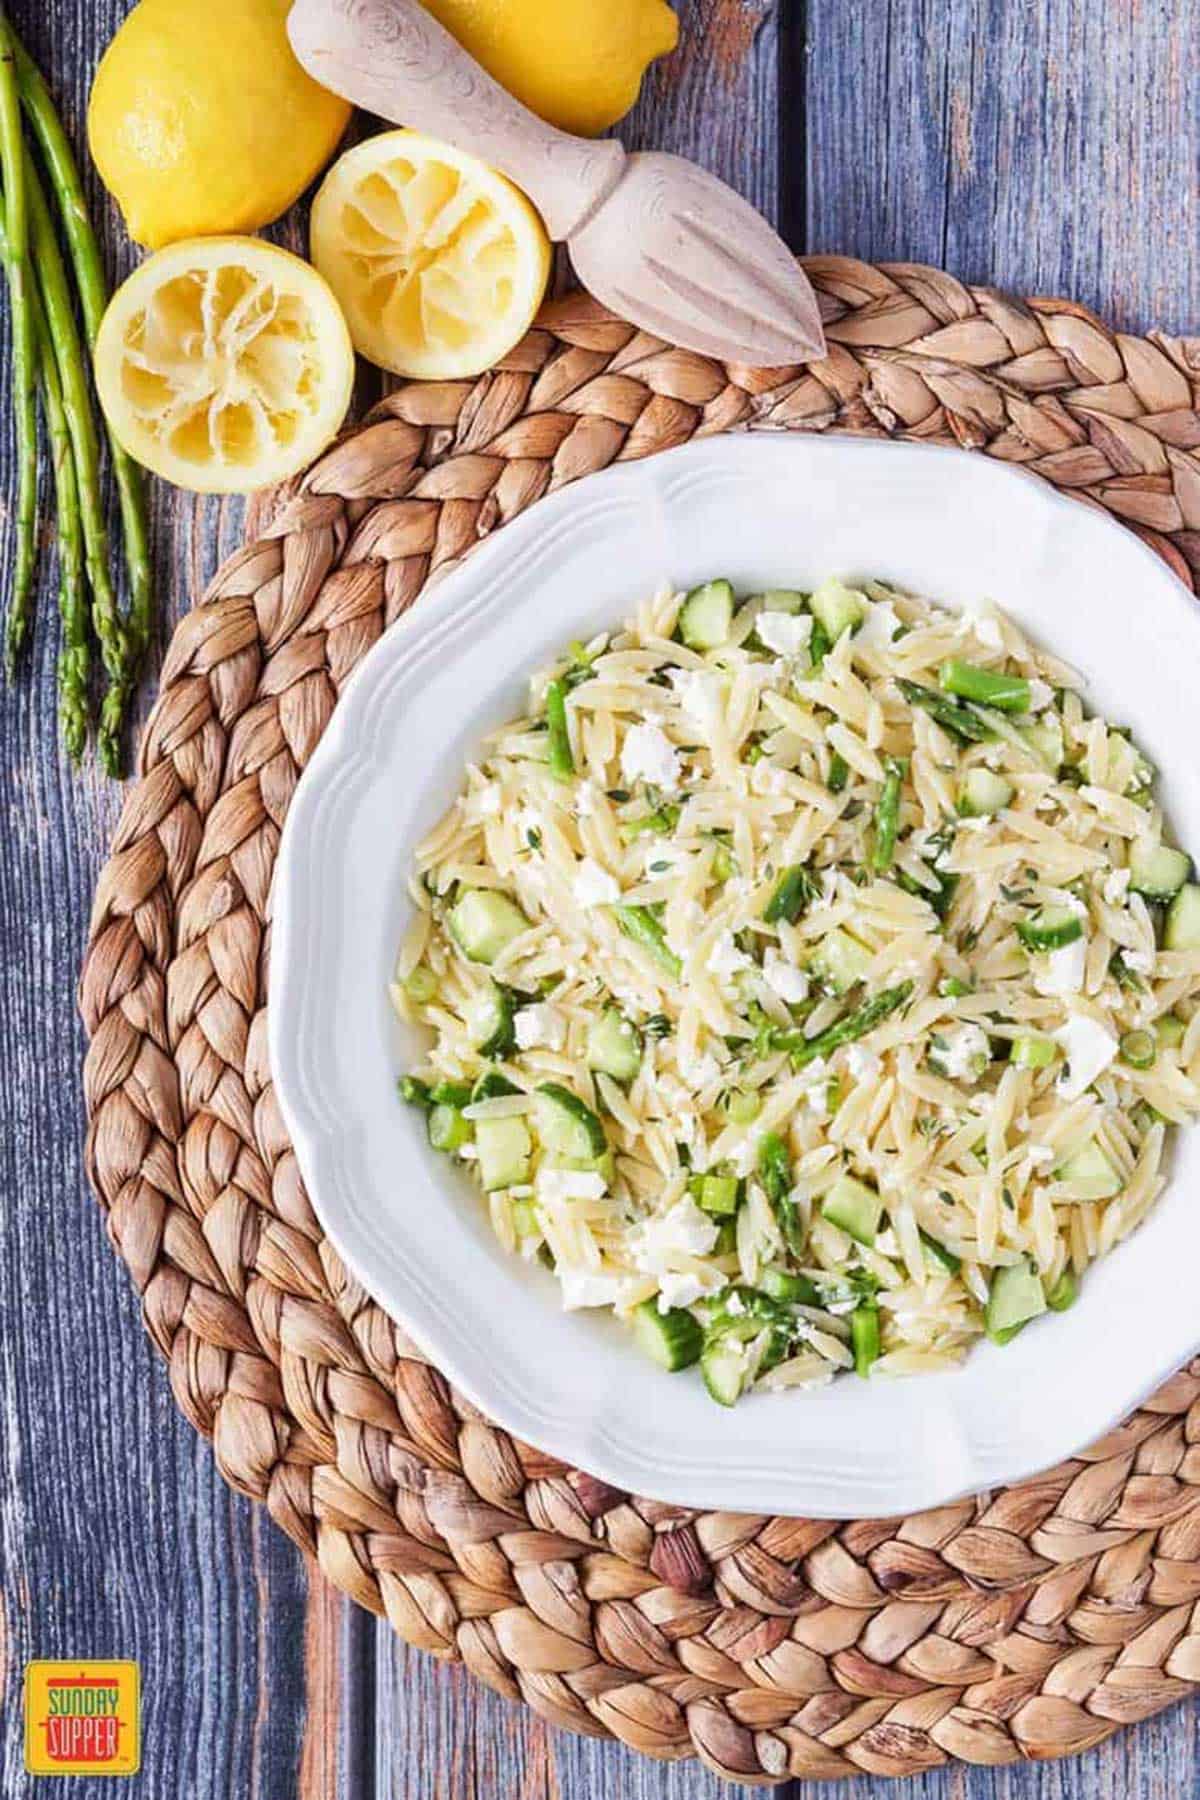 Lemon orzo pasta salad in a large white bowl with squeezed lemons on the side